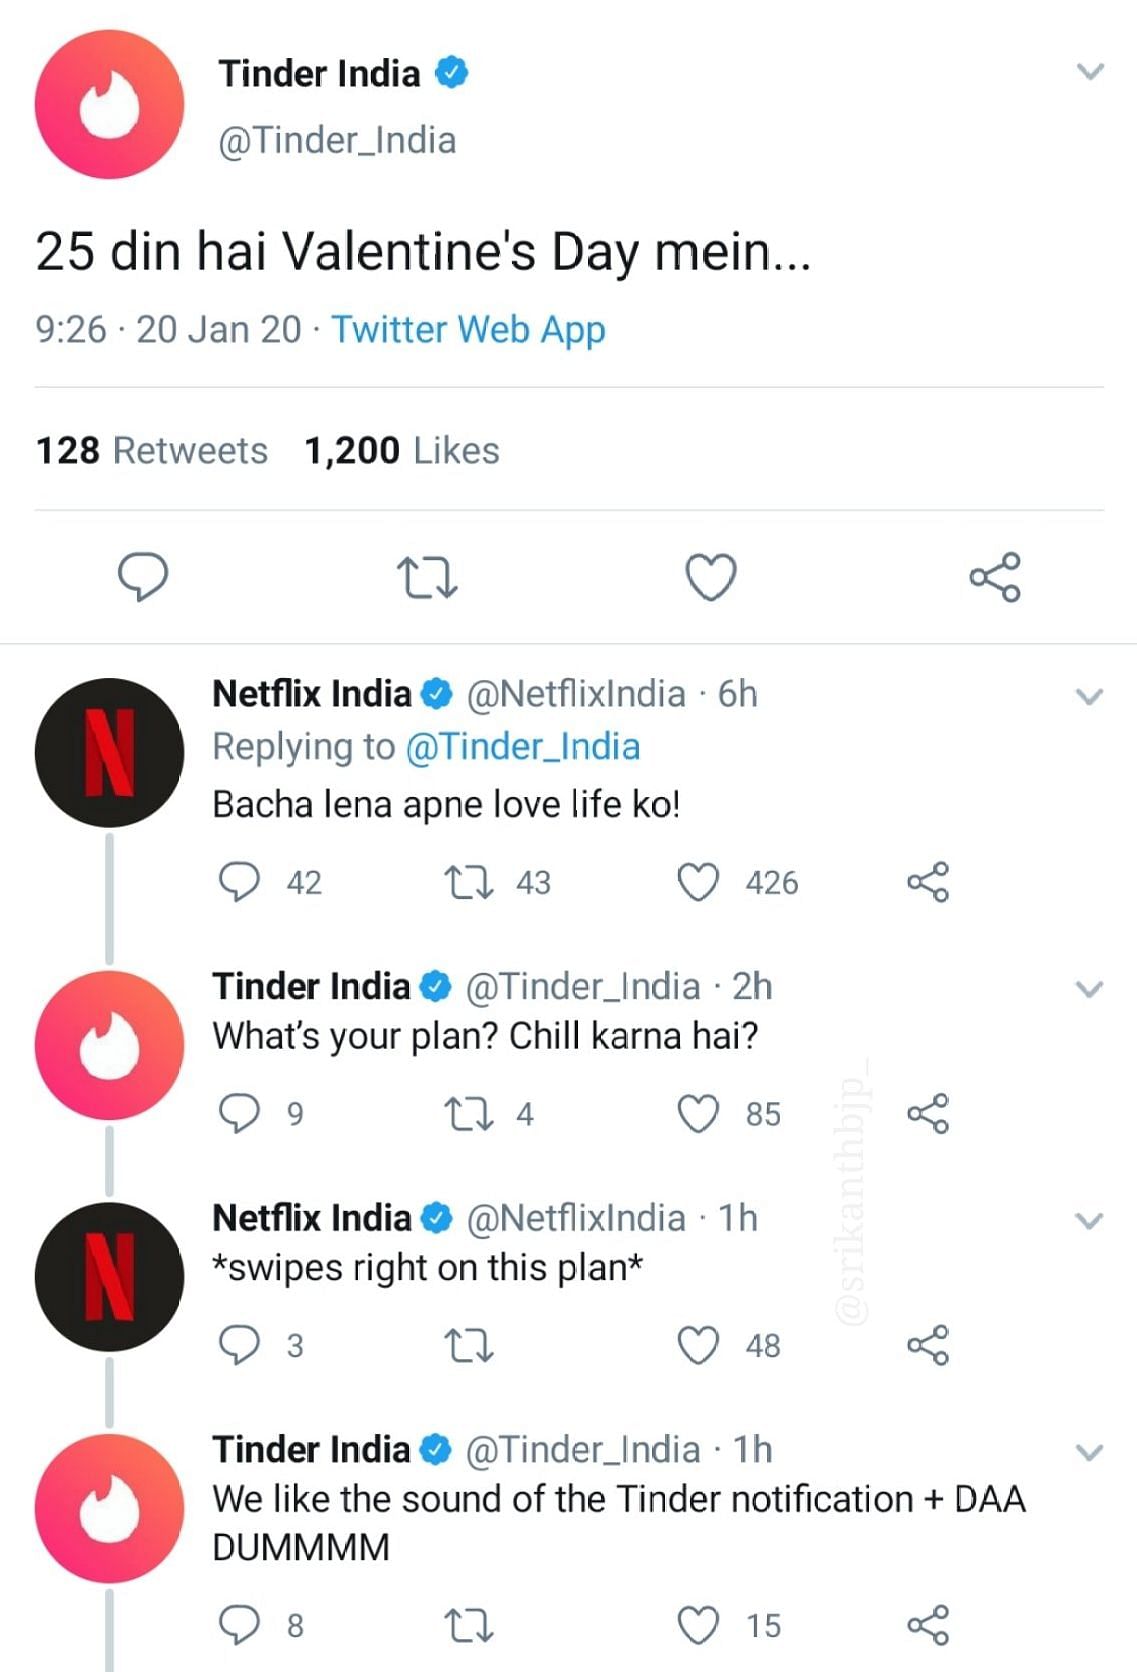 Tinder and Netflix get the ball rolling in a Twitter exchange...